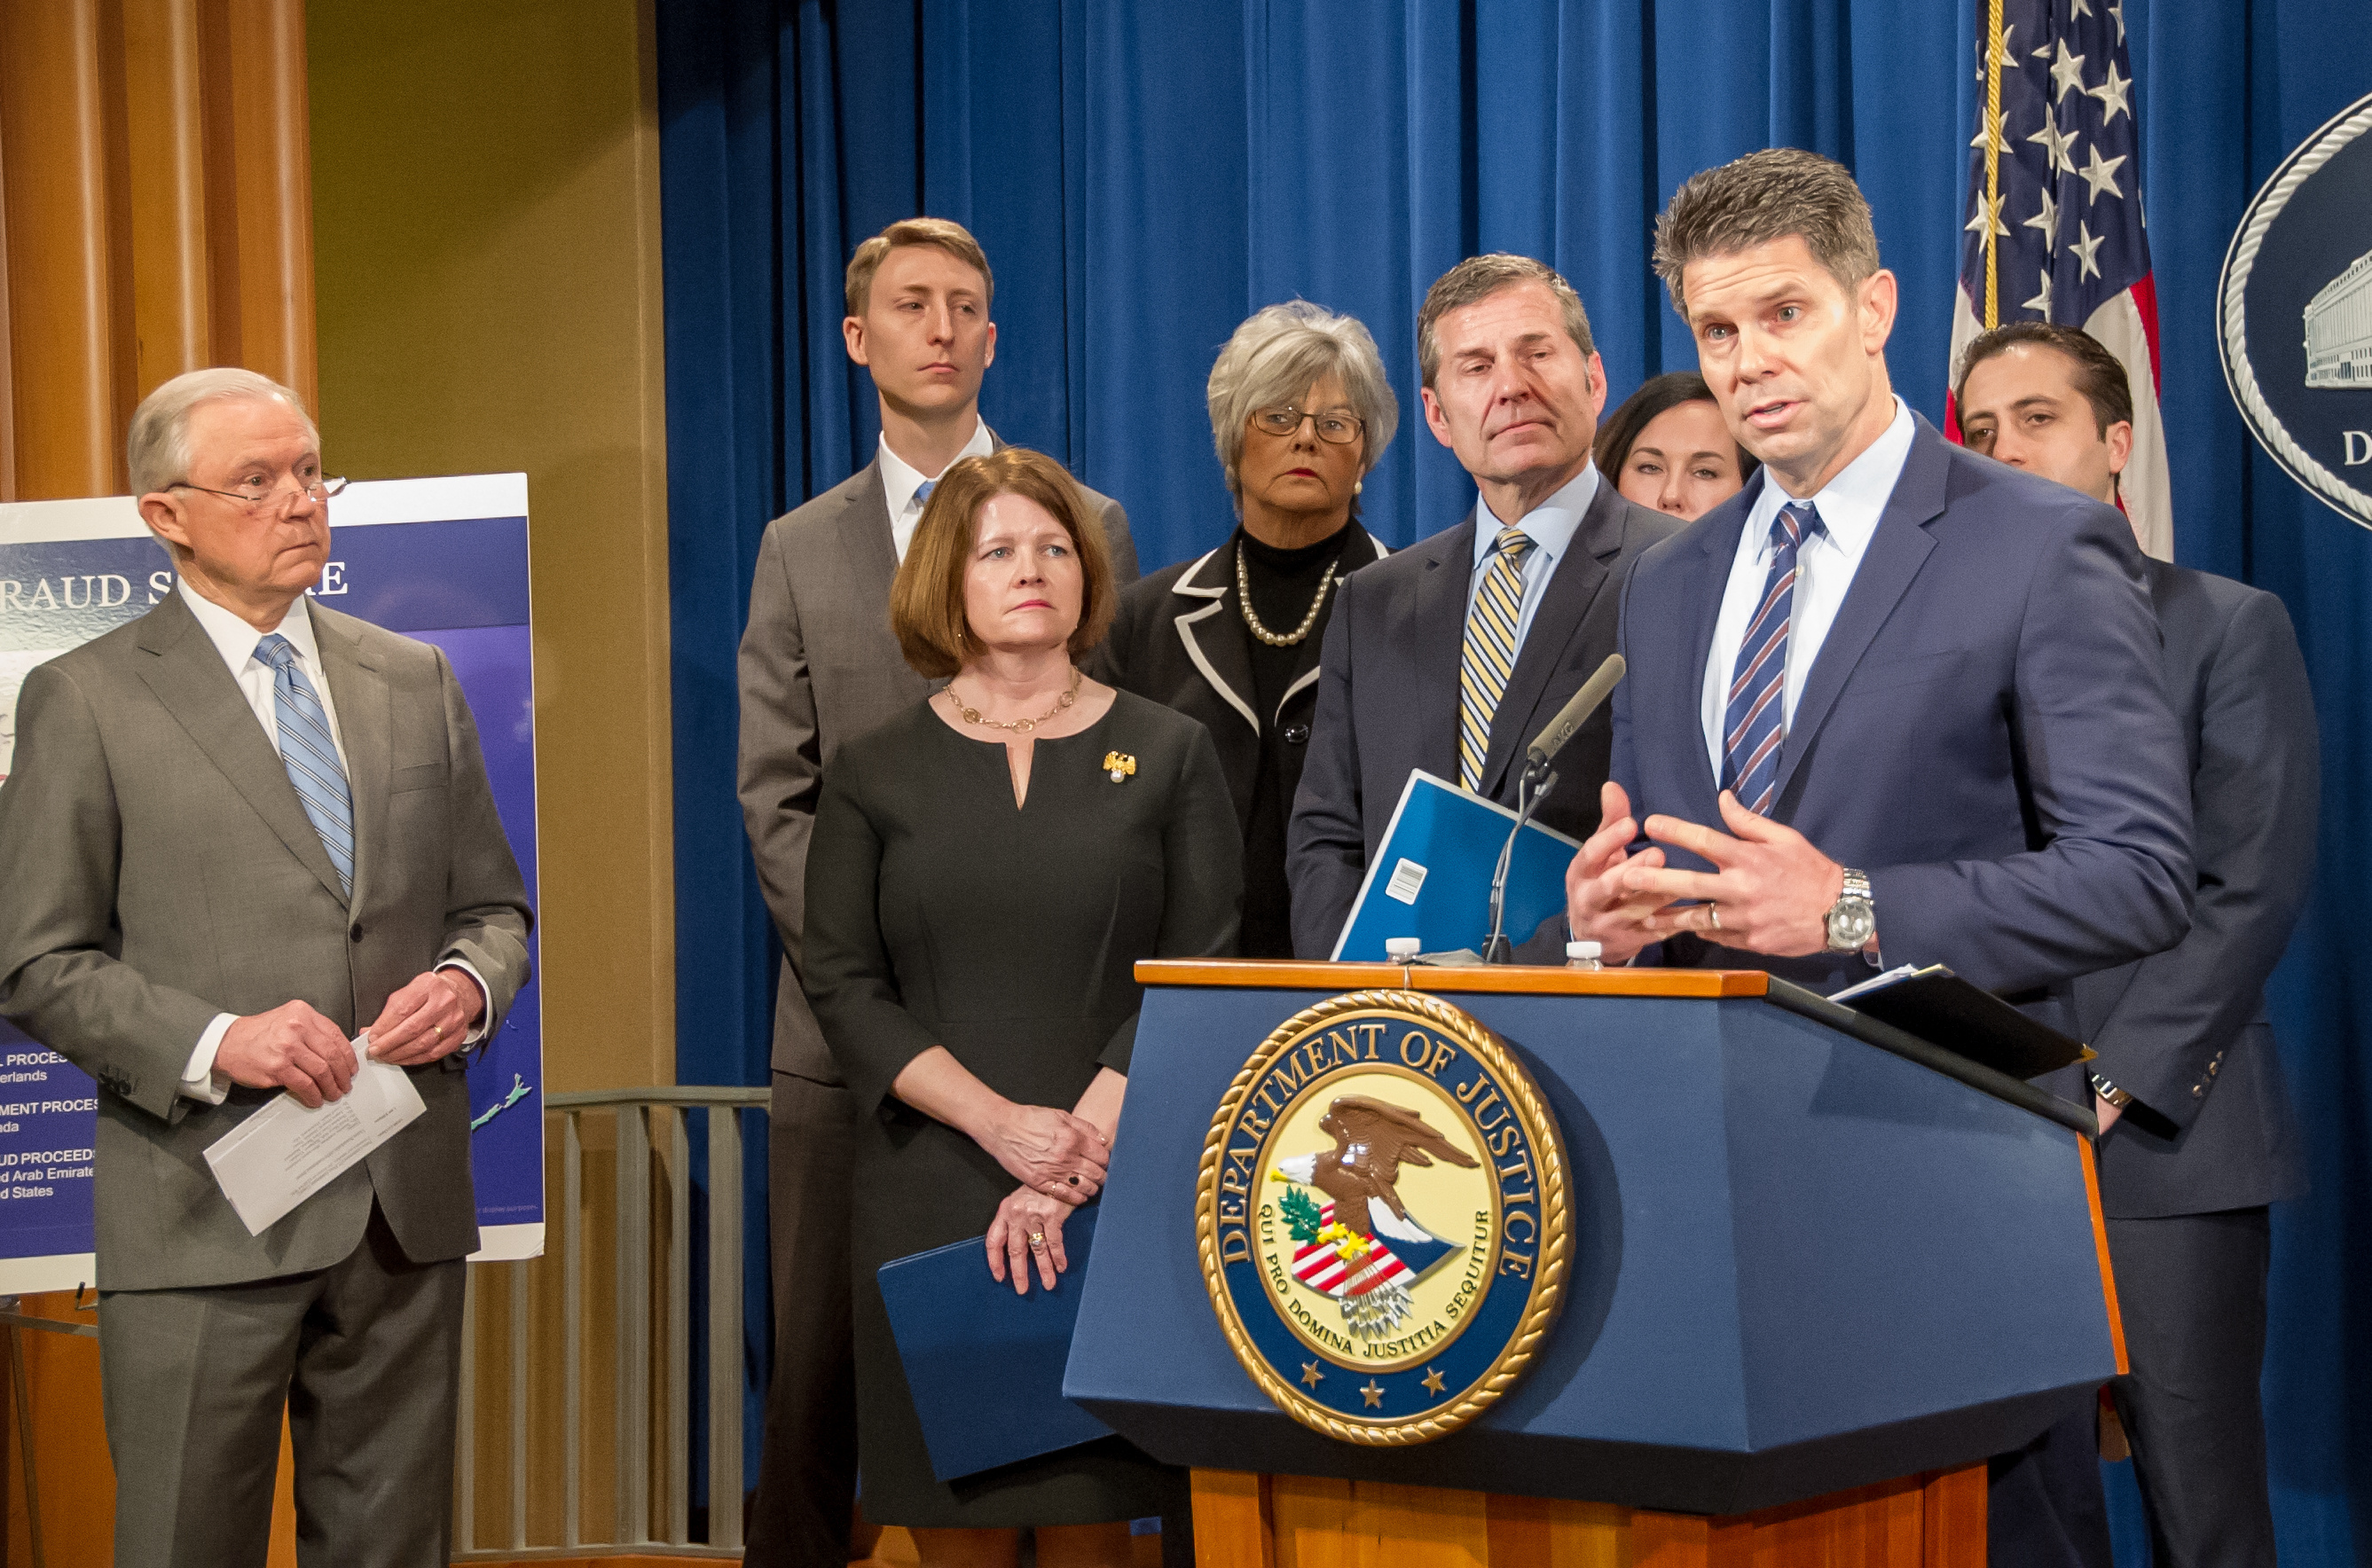 FBI Acting Deputy Director David Bowdich speaks at a February 22, 2018 press conference announcing elder fraud charges as Attorney General Jeff Sessions and others look on.